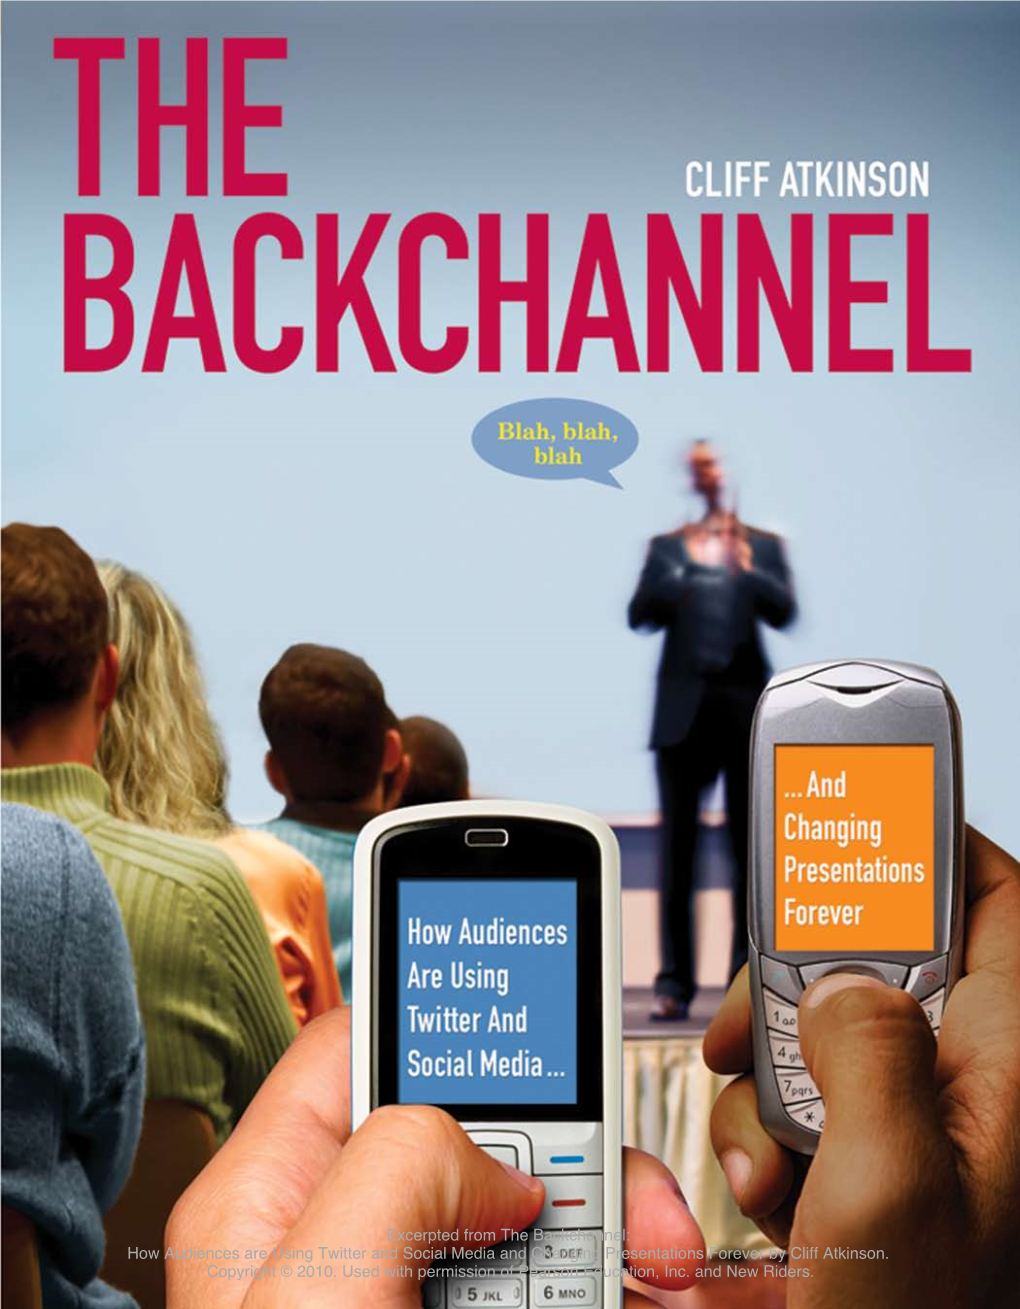 Excerpted from the Backchannel: How Audiences Are Using Twitter and Social Media and Changing Presentations Forever by Cliff Atkinson